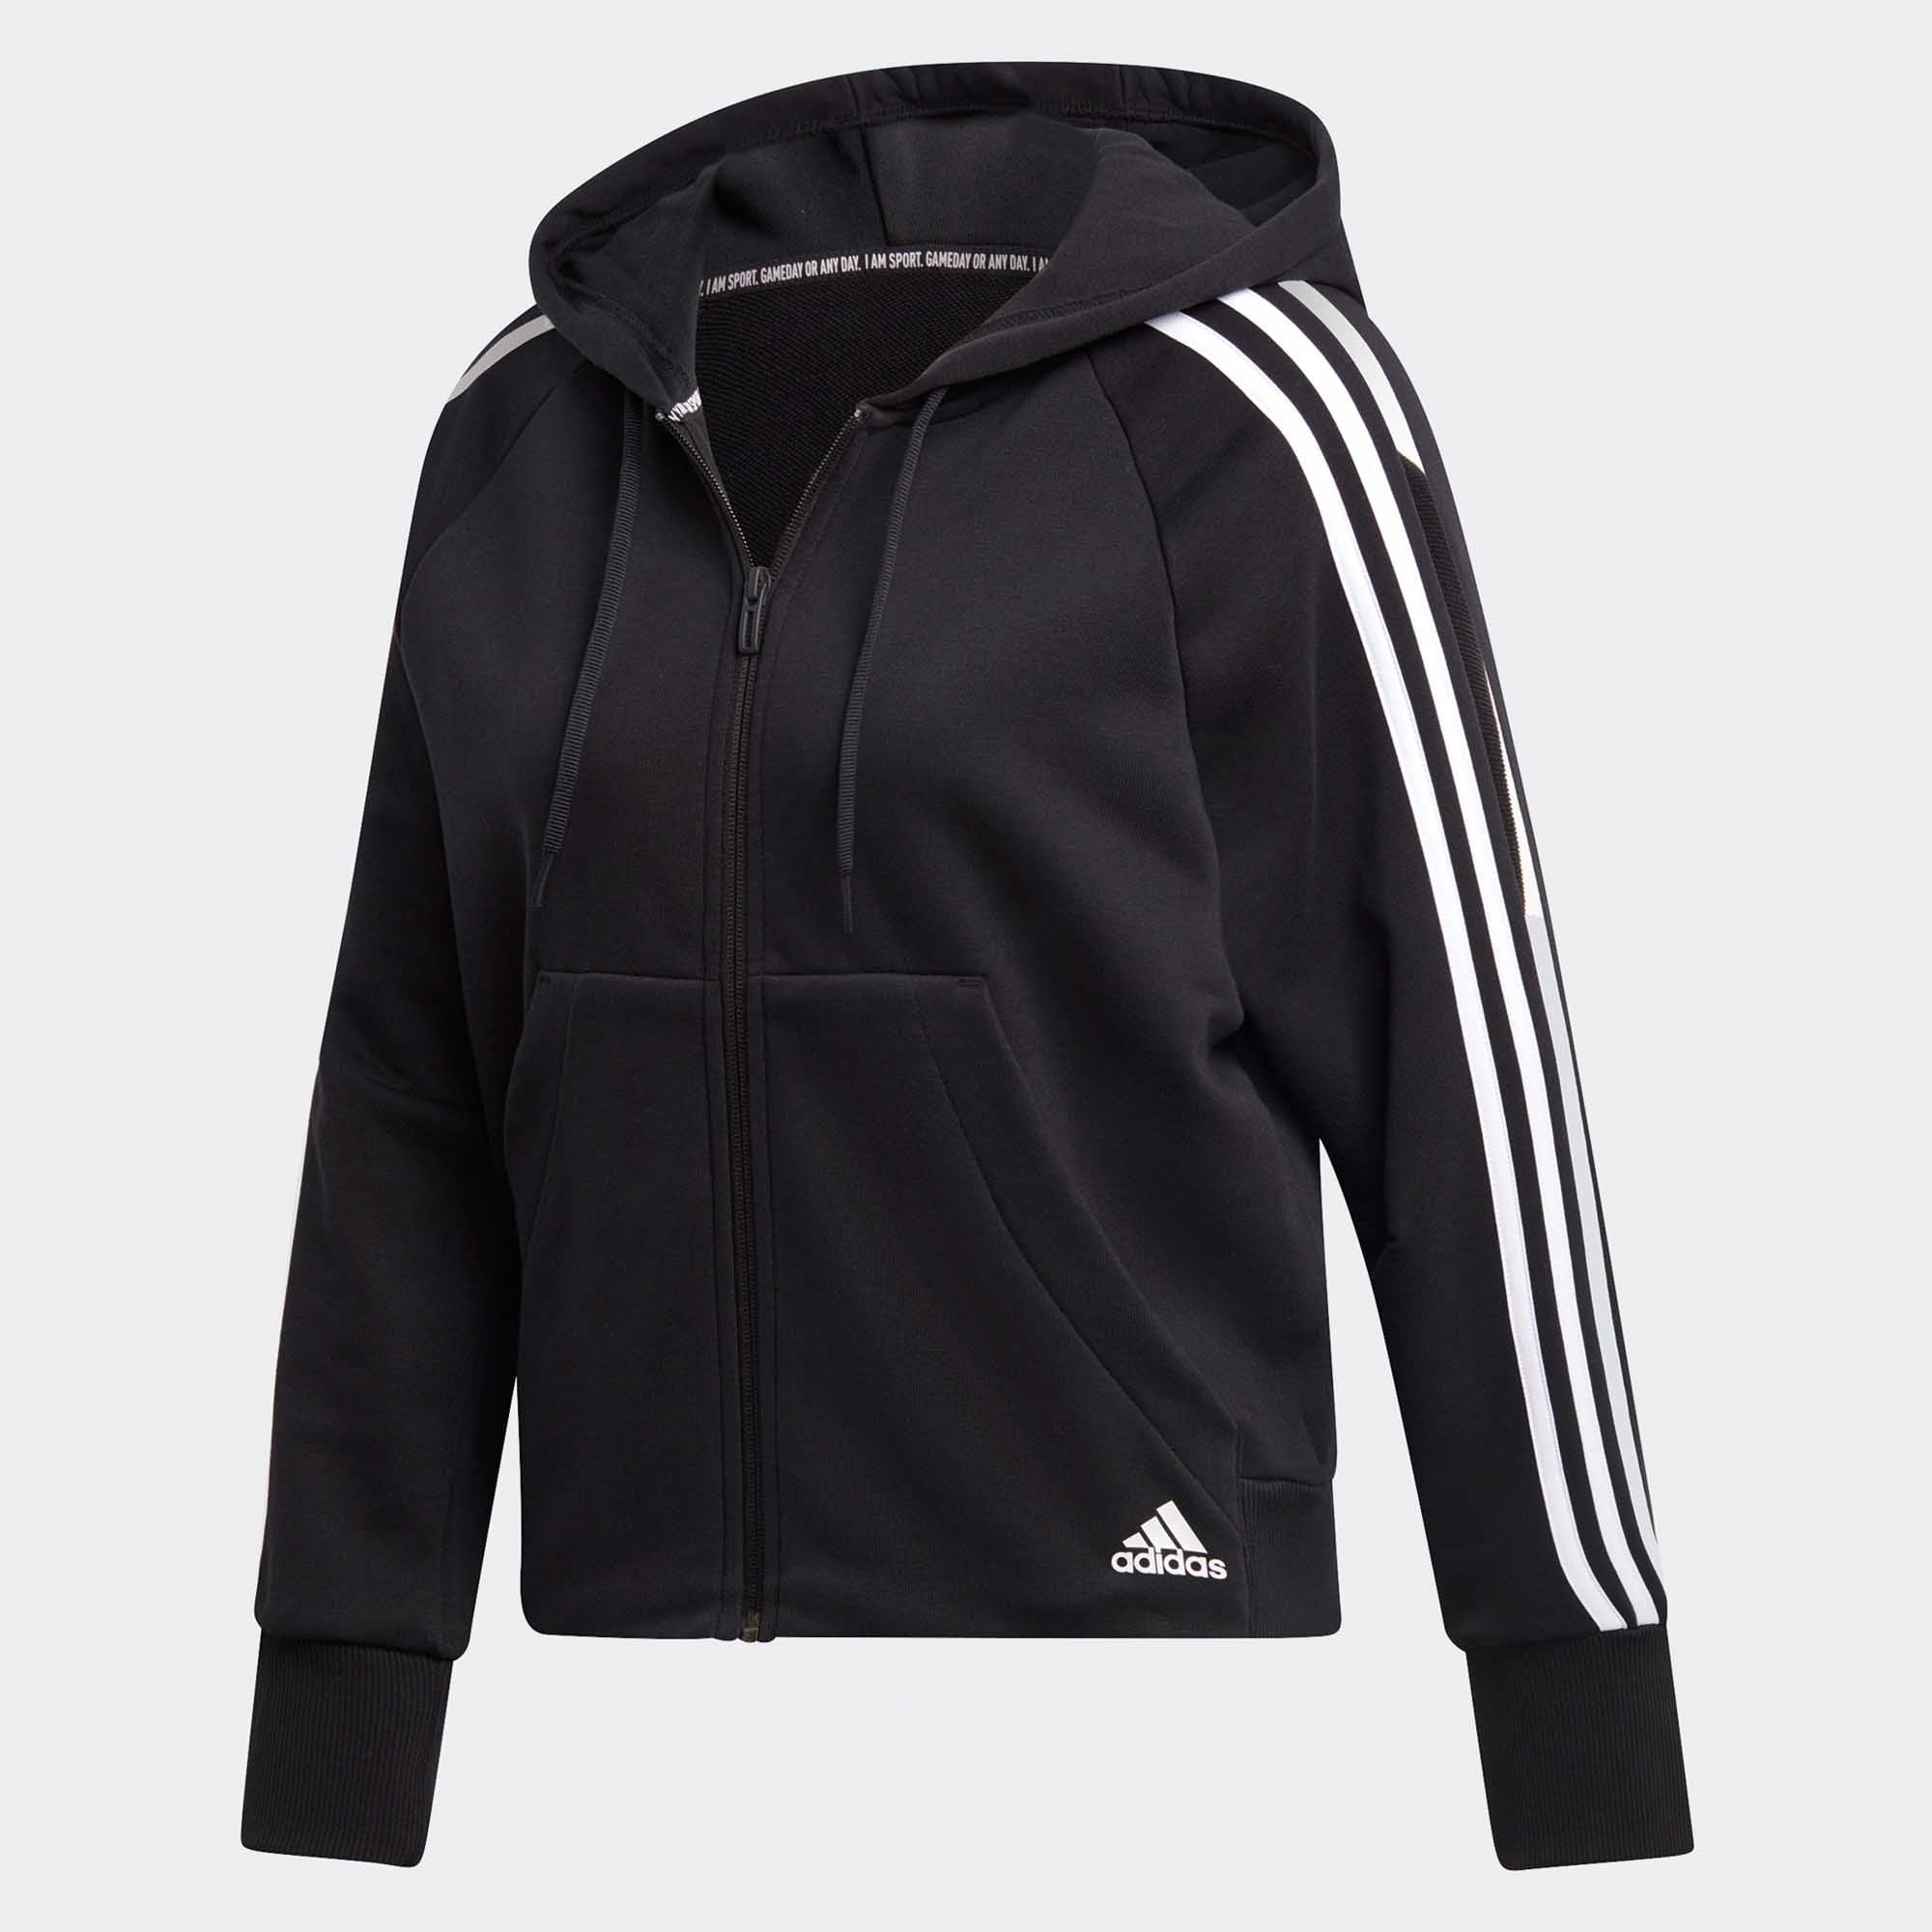 buy adidas clothes online